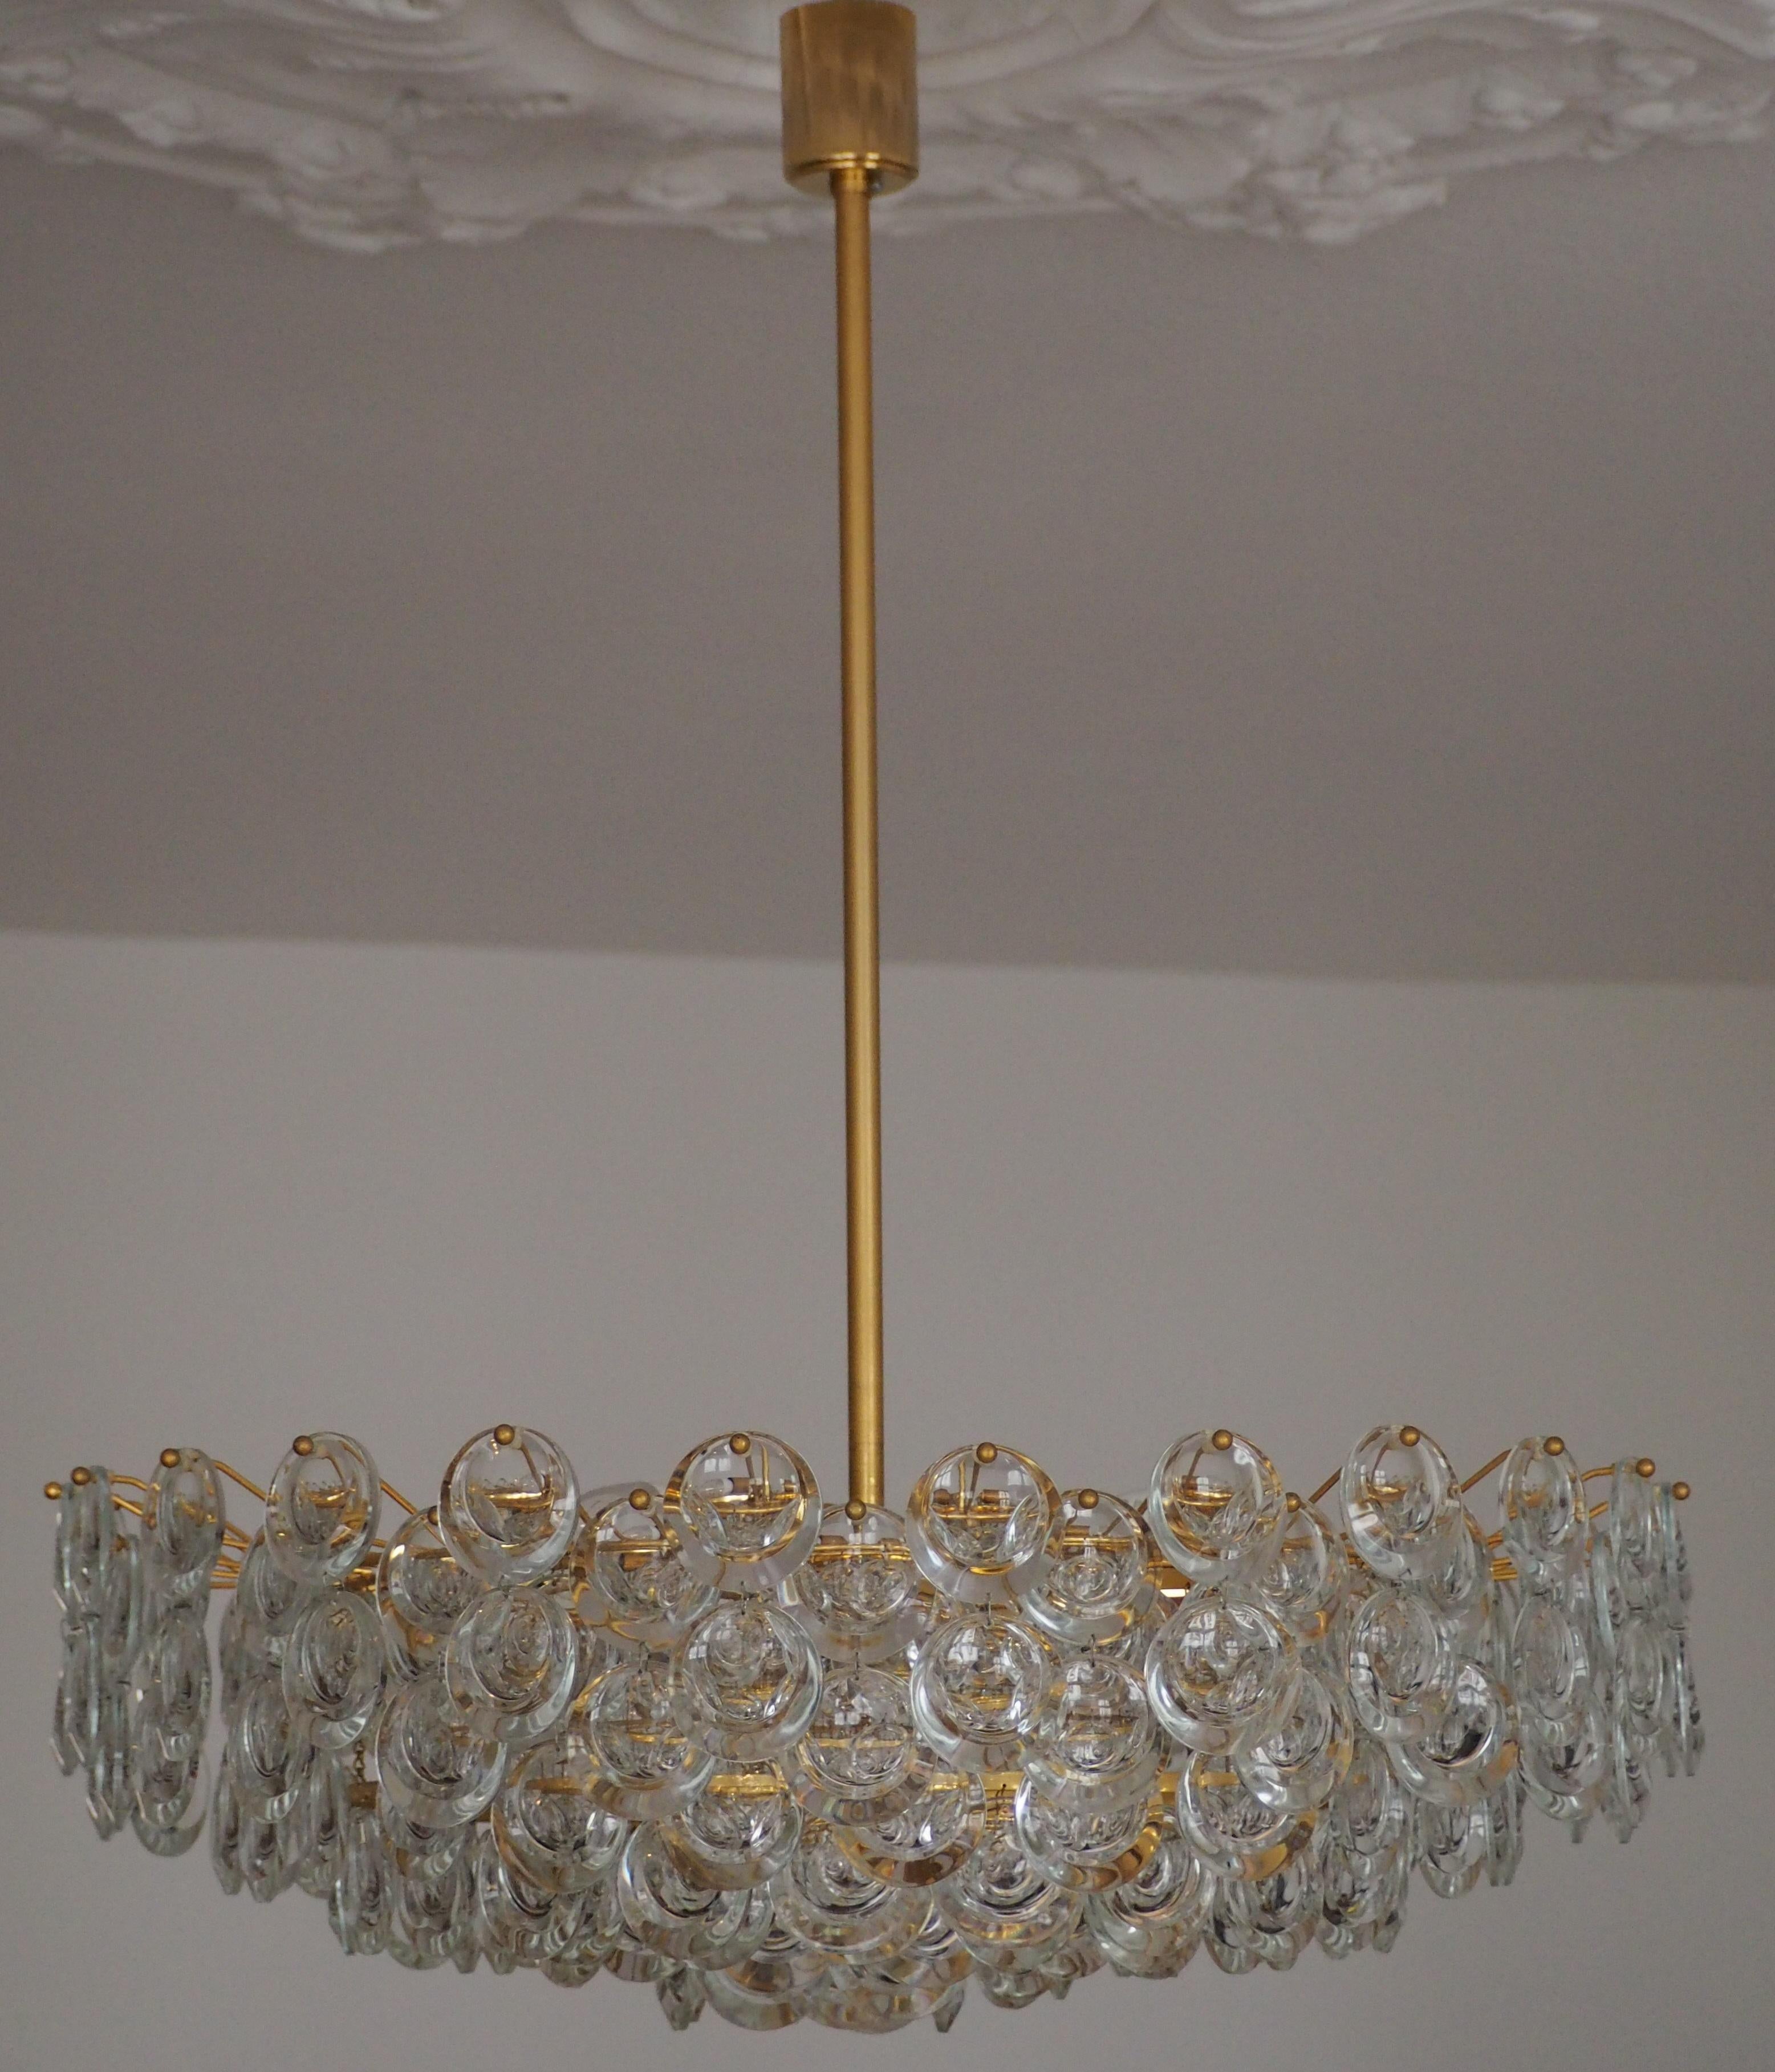 Mid-Century Modern Pair of Huge Gold-Plated and Cut Glass Chandeliers by Palwa, circa 1960s